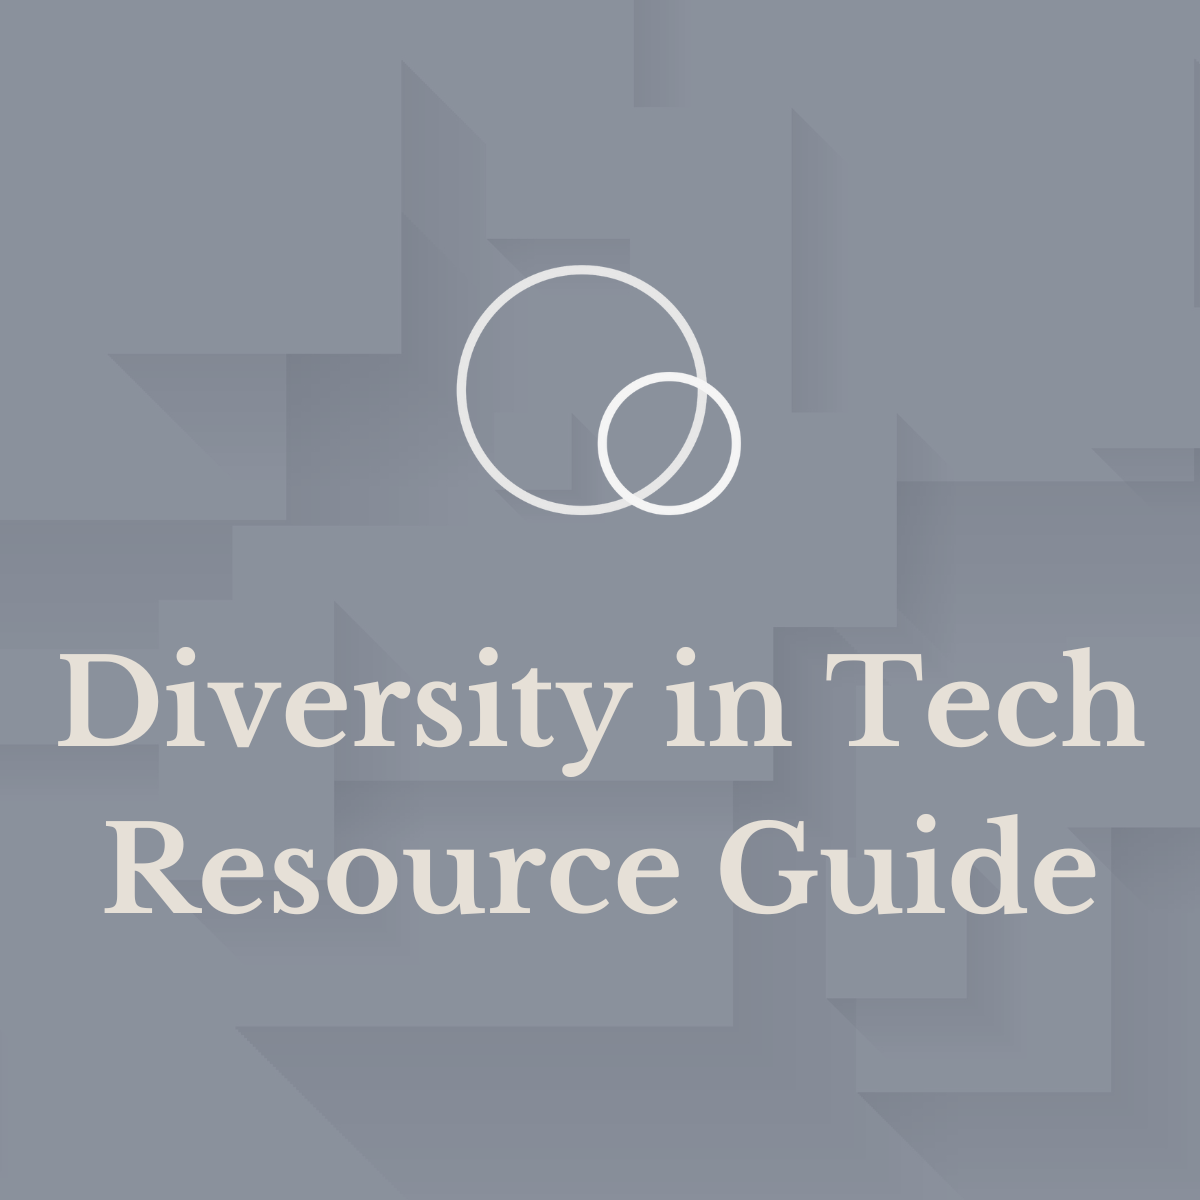 Diversity in Tech Resource Guide